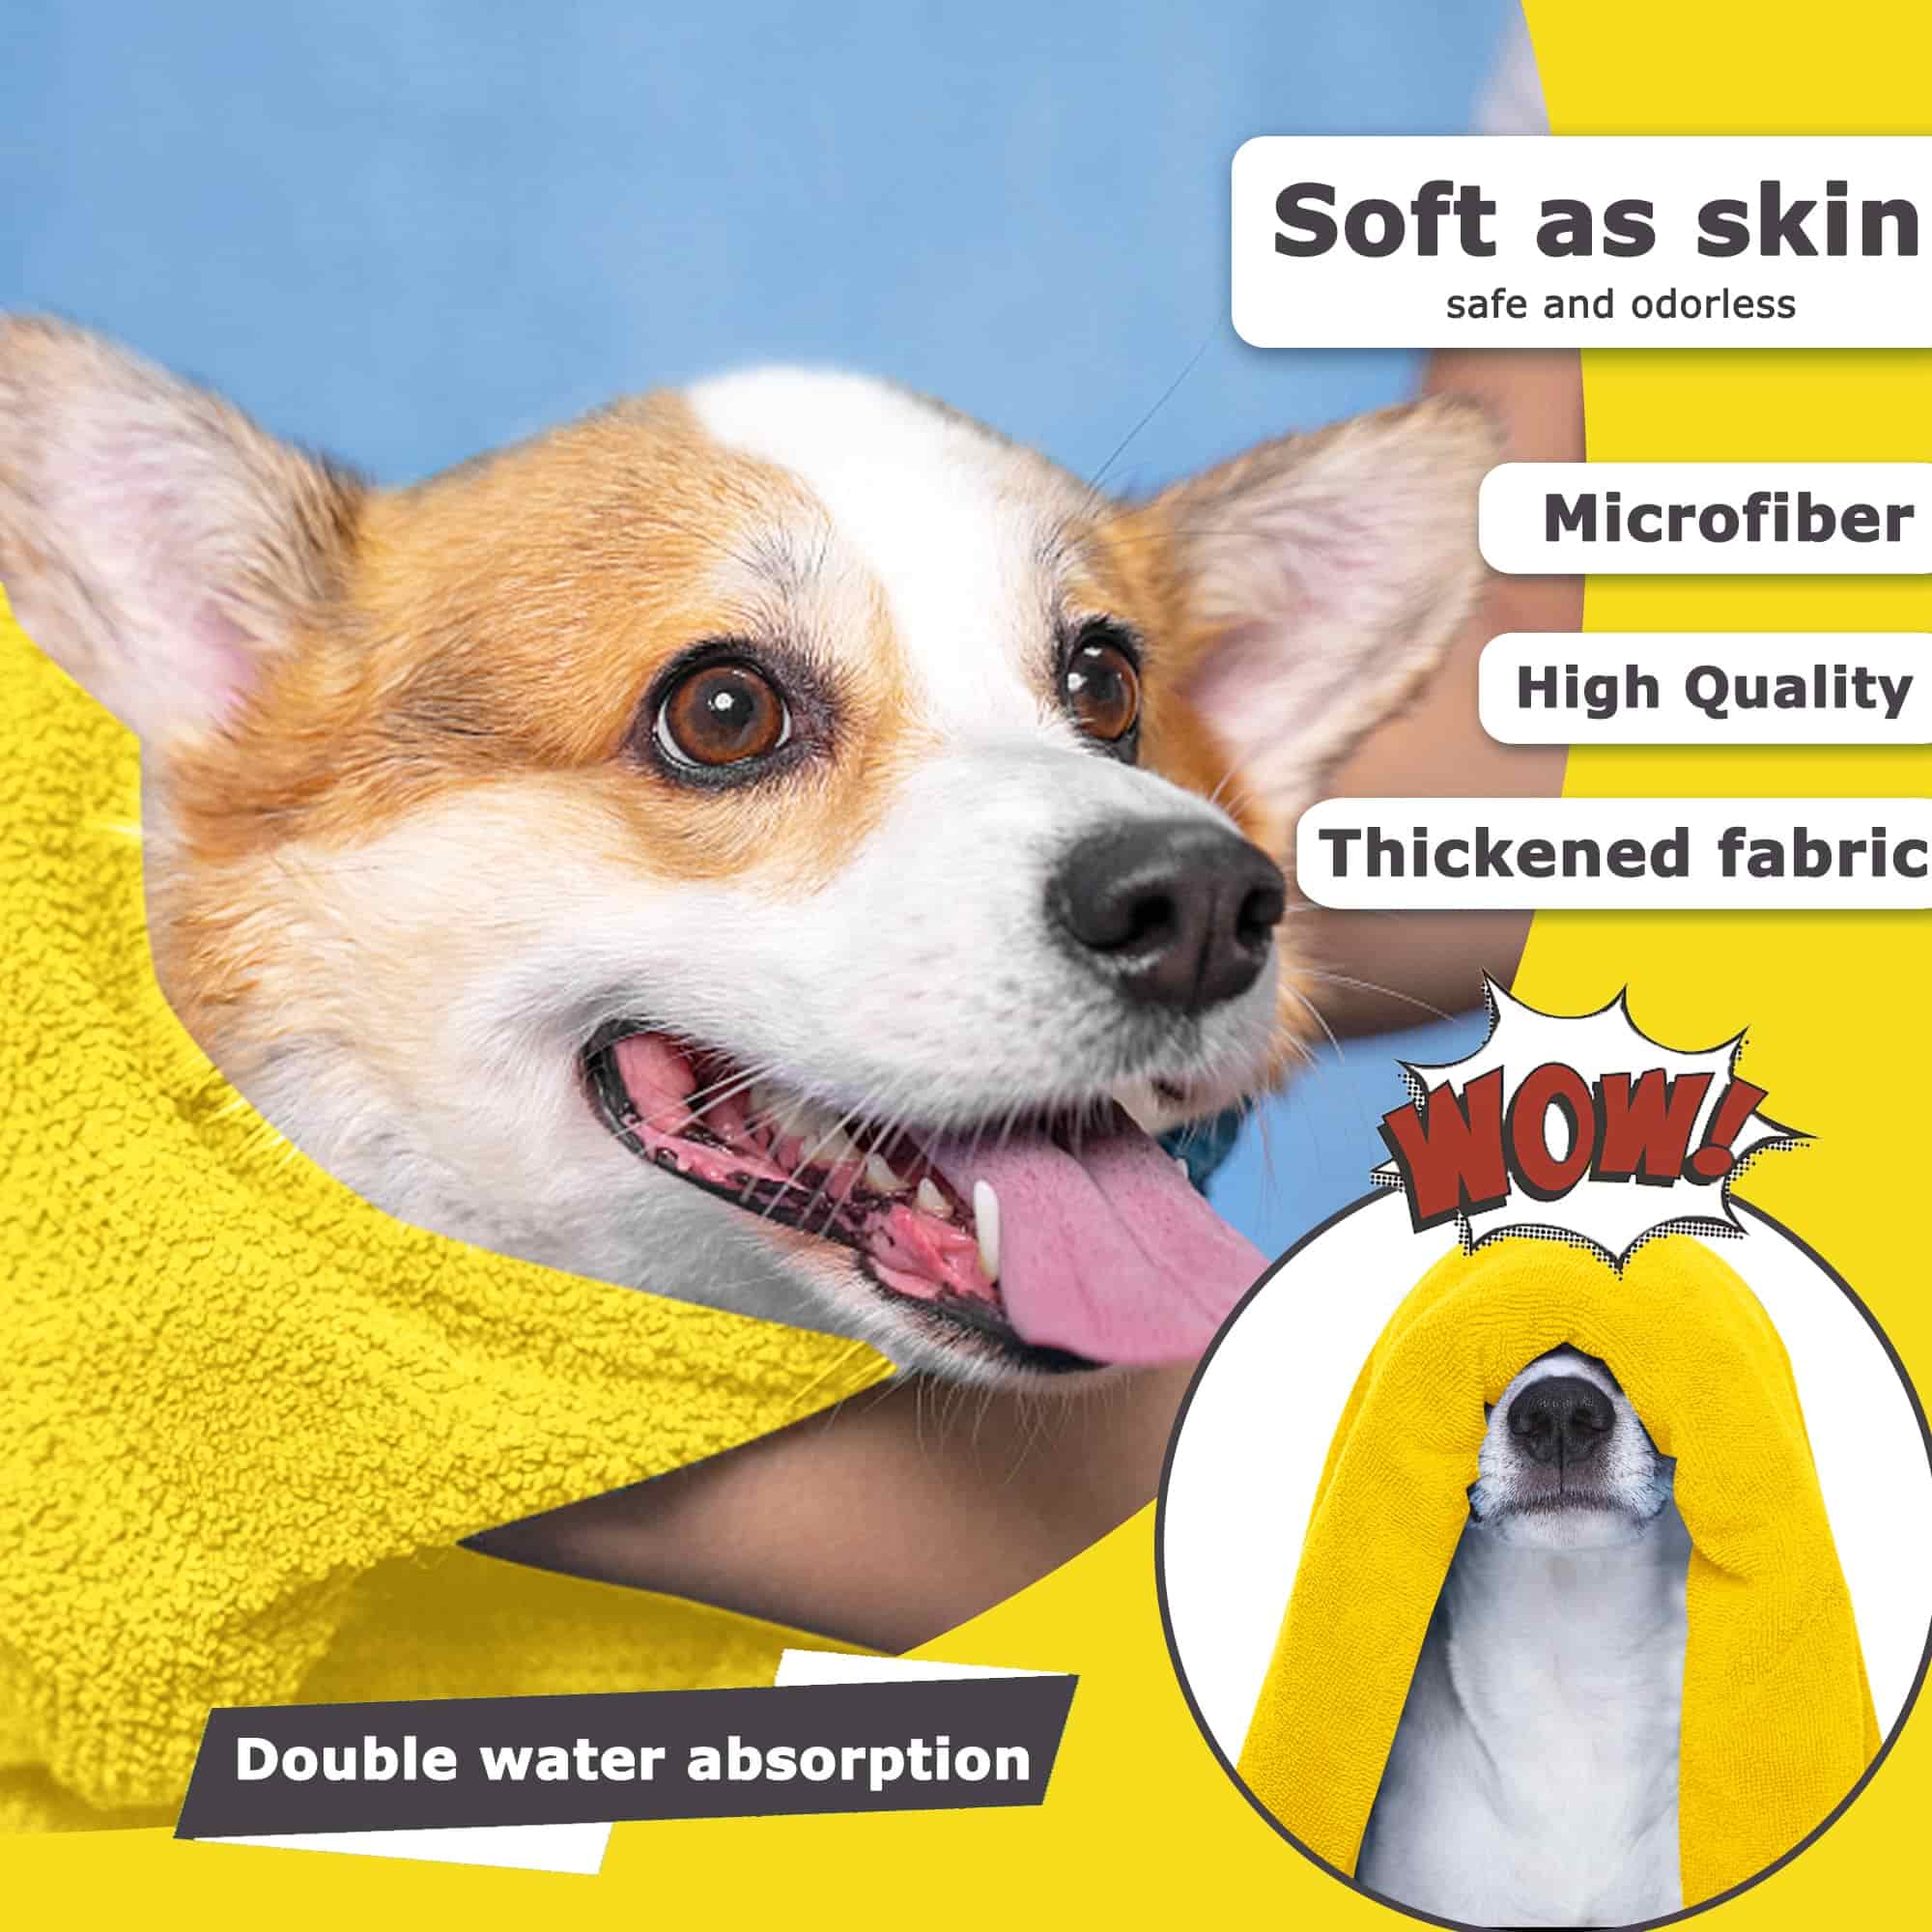 Harvey's Choice Dog Towels for Drying Dogs: Keep your furry friend warm and dry. Superior water absorption, quick drying, cozy and warm. Made from soft superfine fibers, gentle bath experience, safe and odorless. Available in sizes M, L, and XL. Order now!